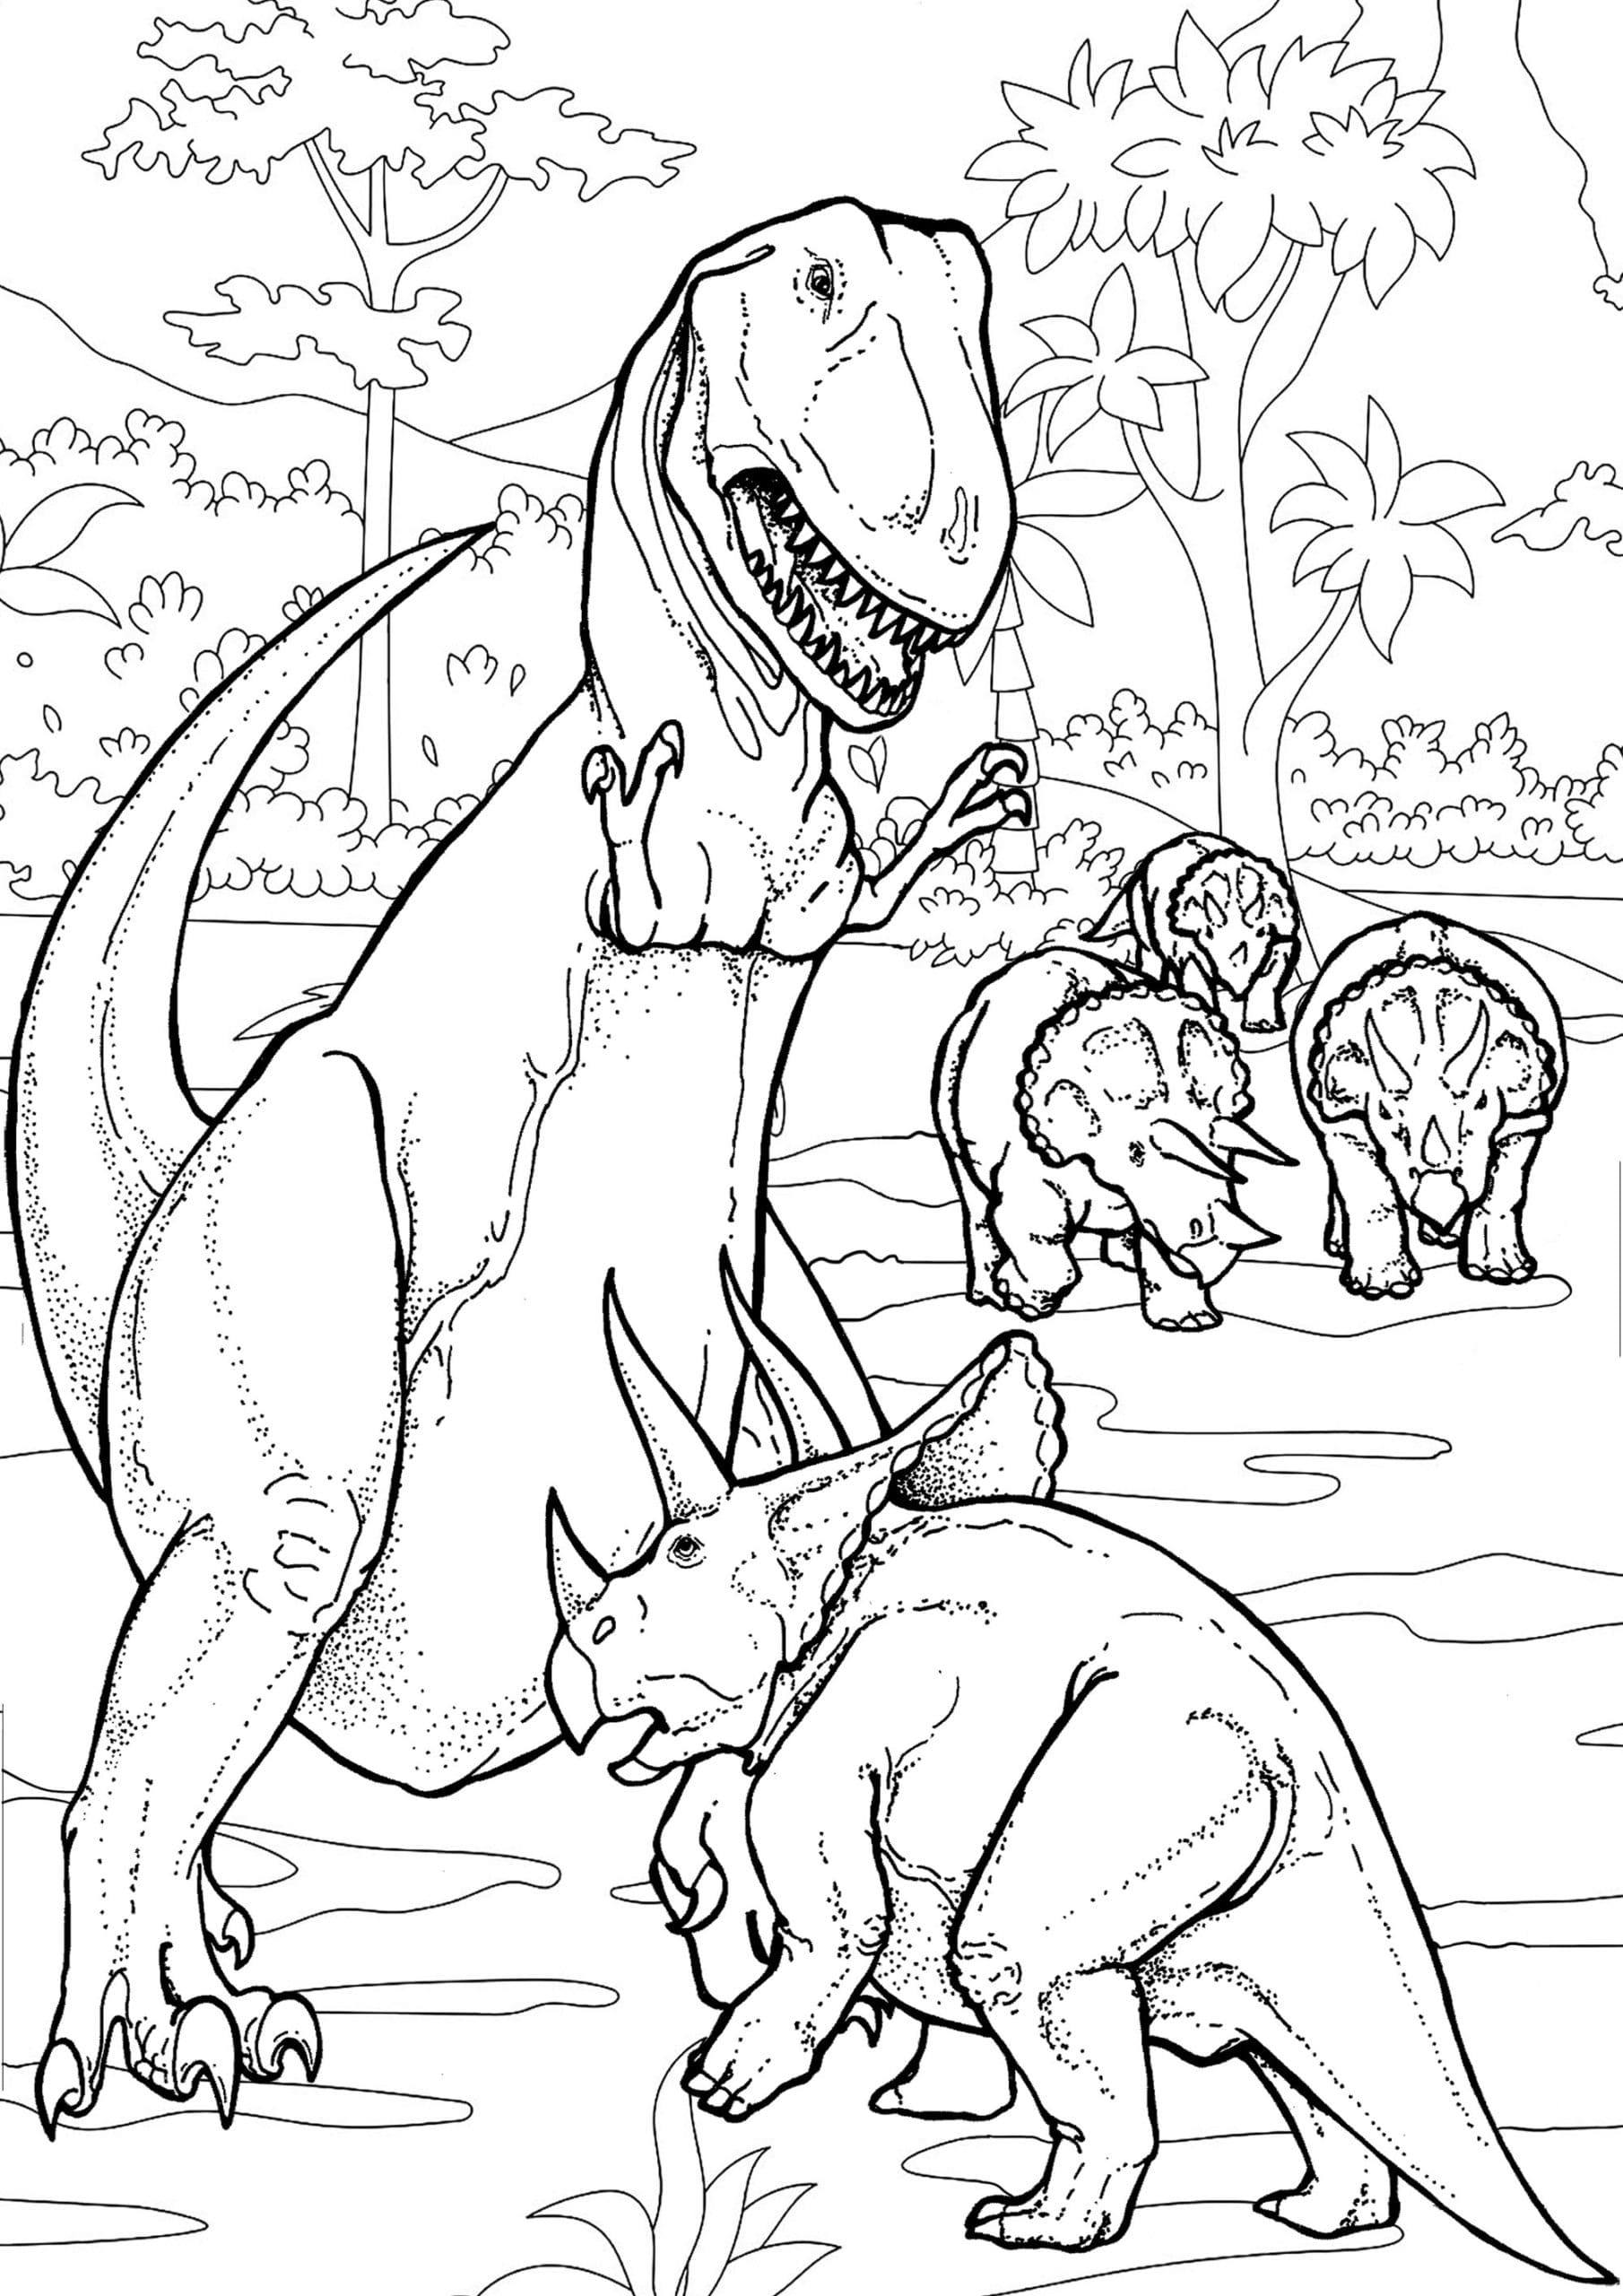 Coloring page T-rex Dinosaur fight for food